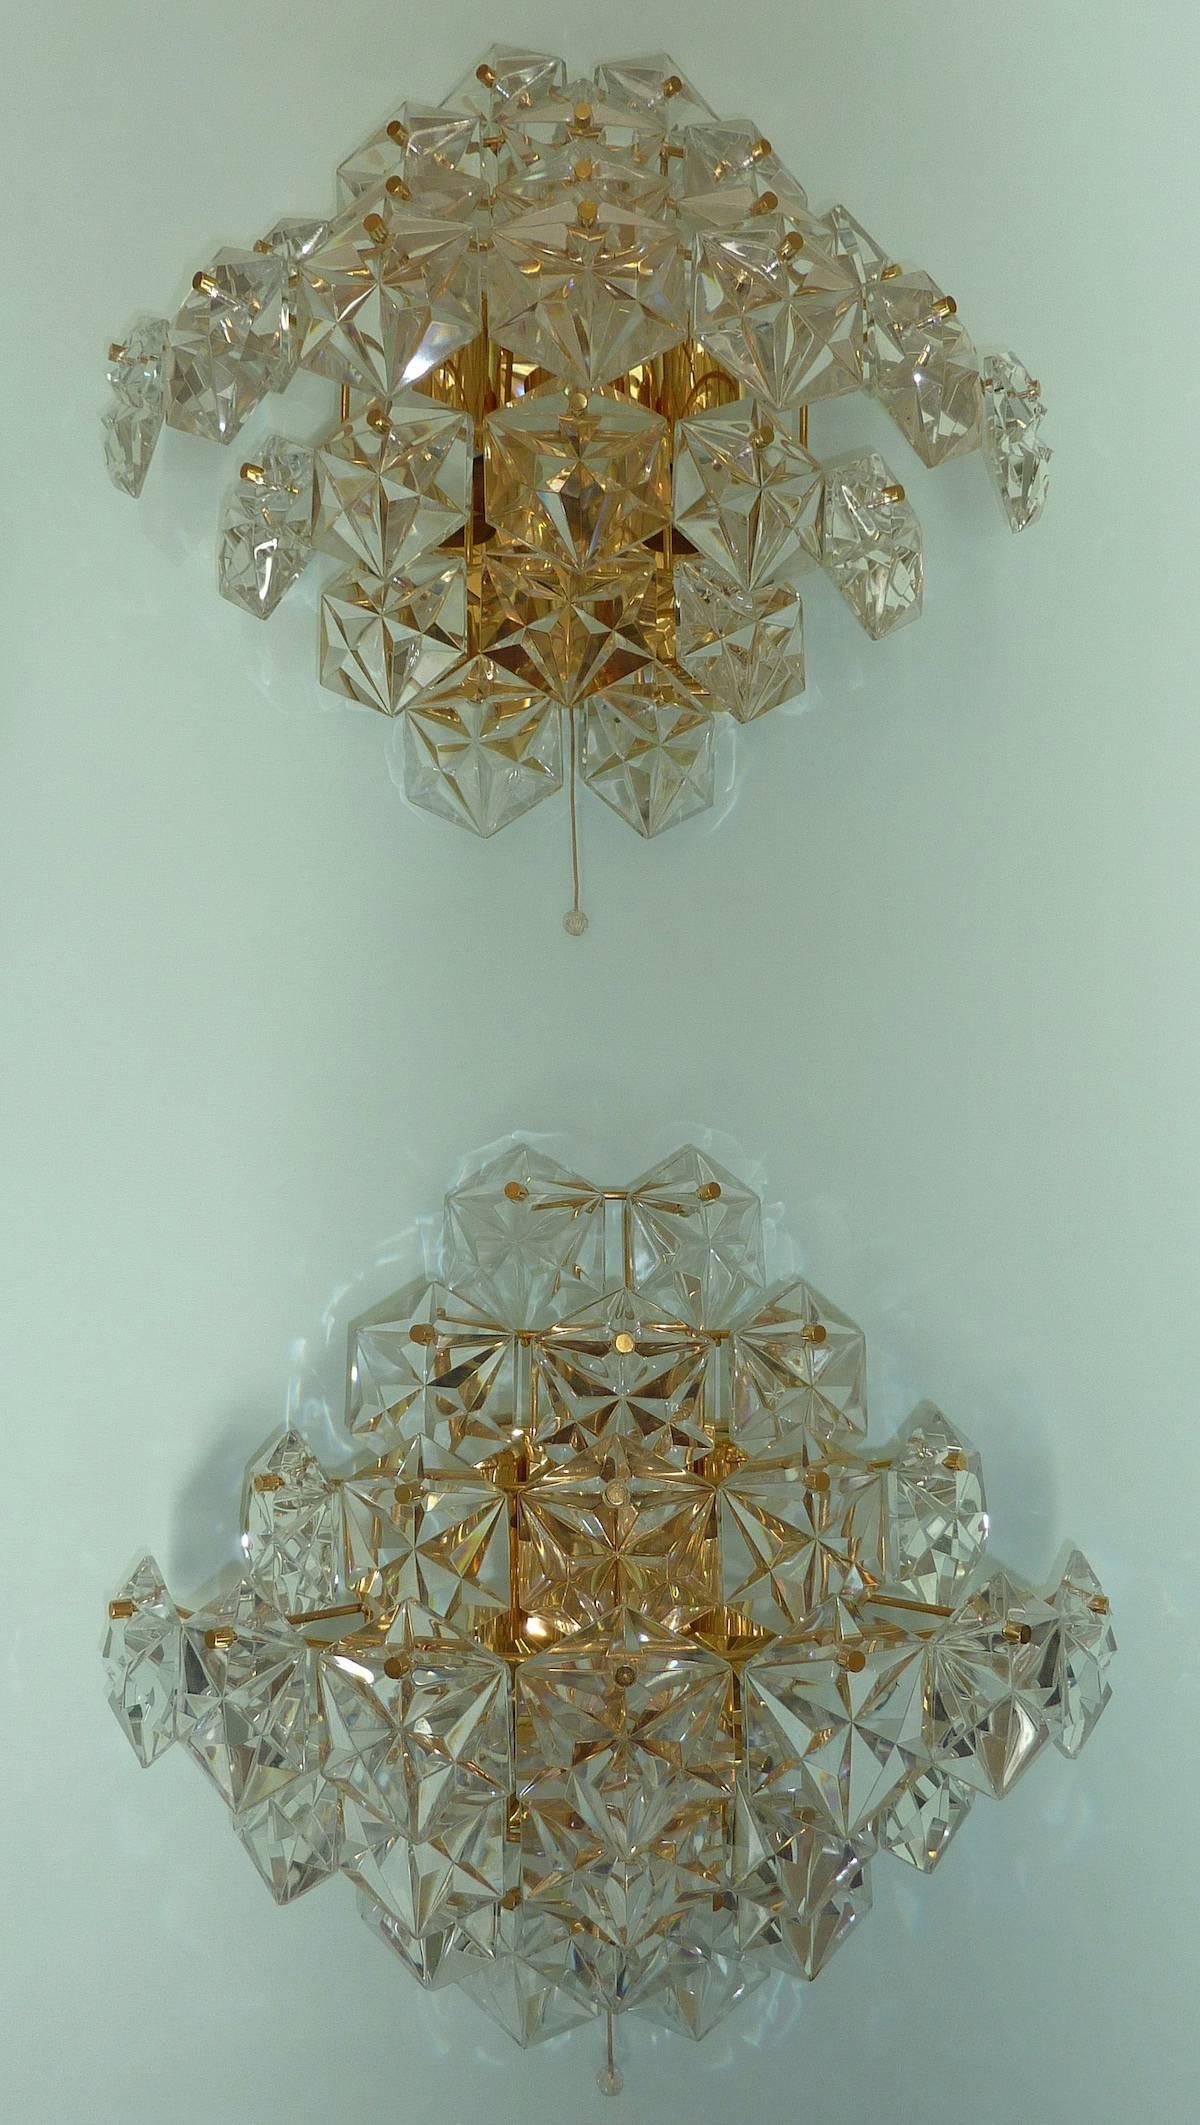 Impressive pair of Kinkeldey sconces with 27 faceted hexagonal crystals on polished brass hardware. The 1960s sconces are semicircular in profile and have an overall diamond shape. There are three sockets; two facing downward, one facing upward.